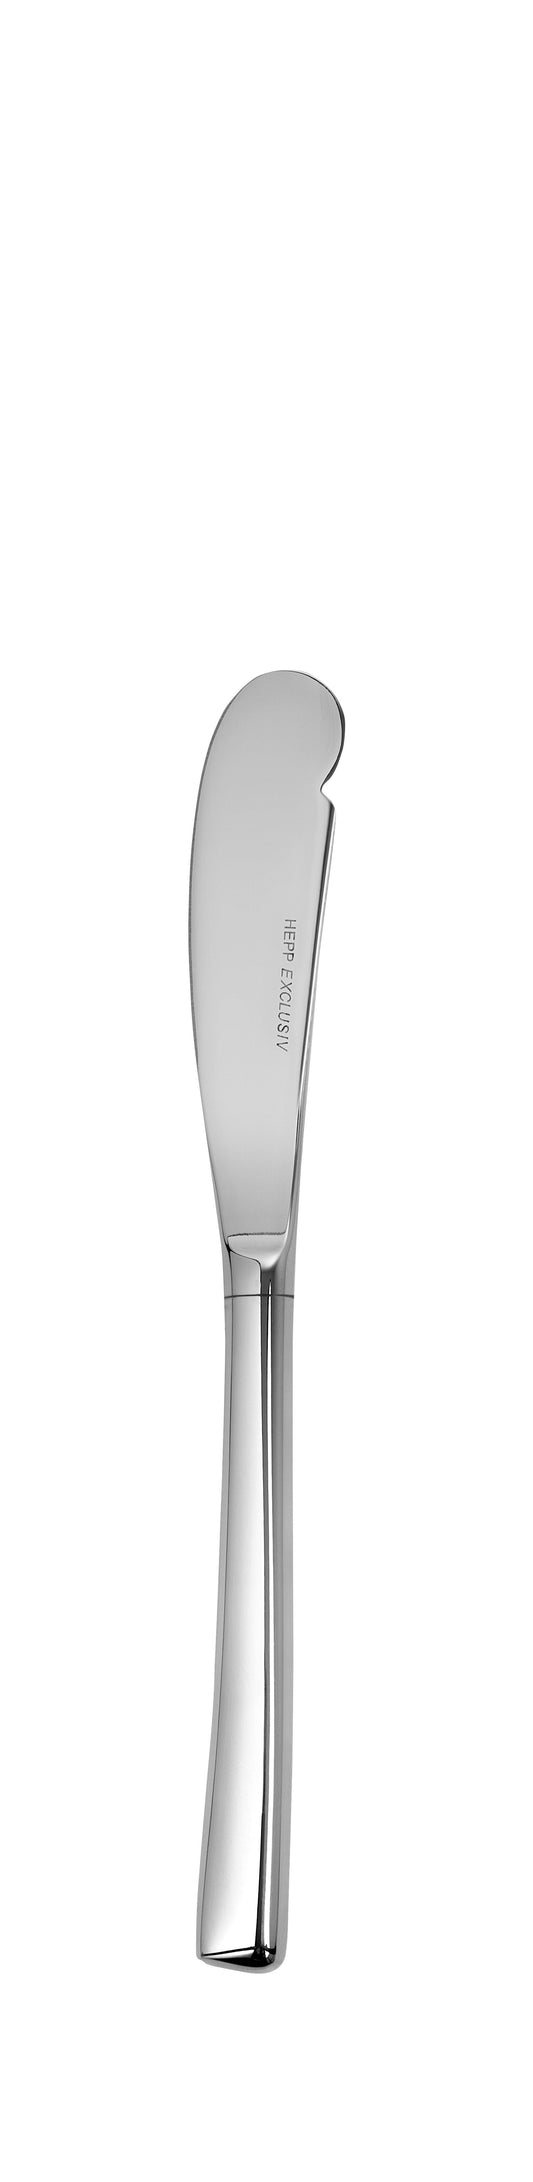 Bread and butter knife HH TRILOGIE 175mm